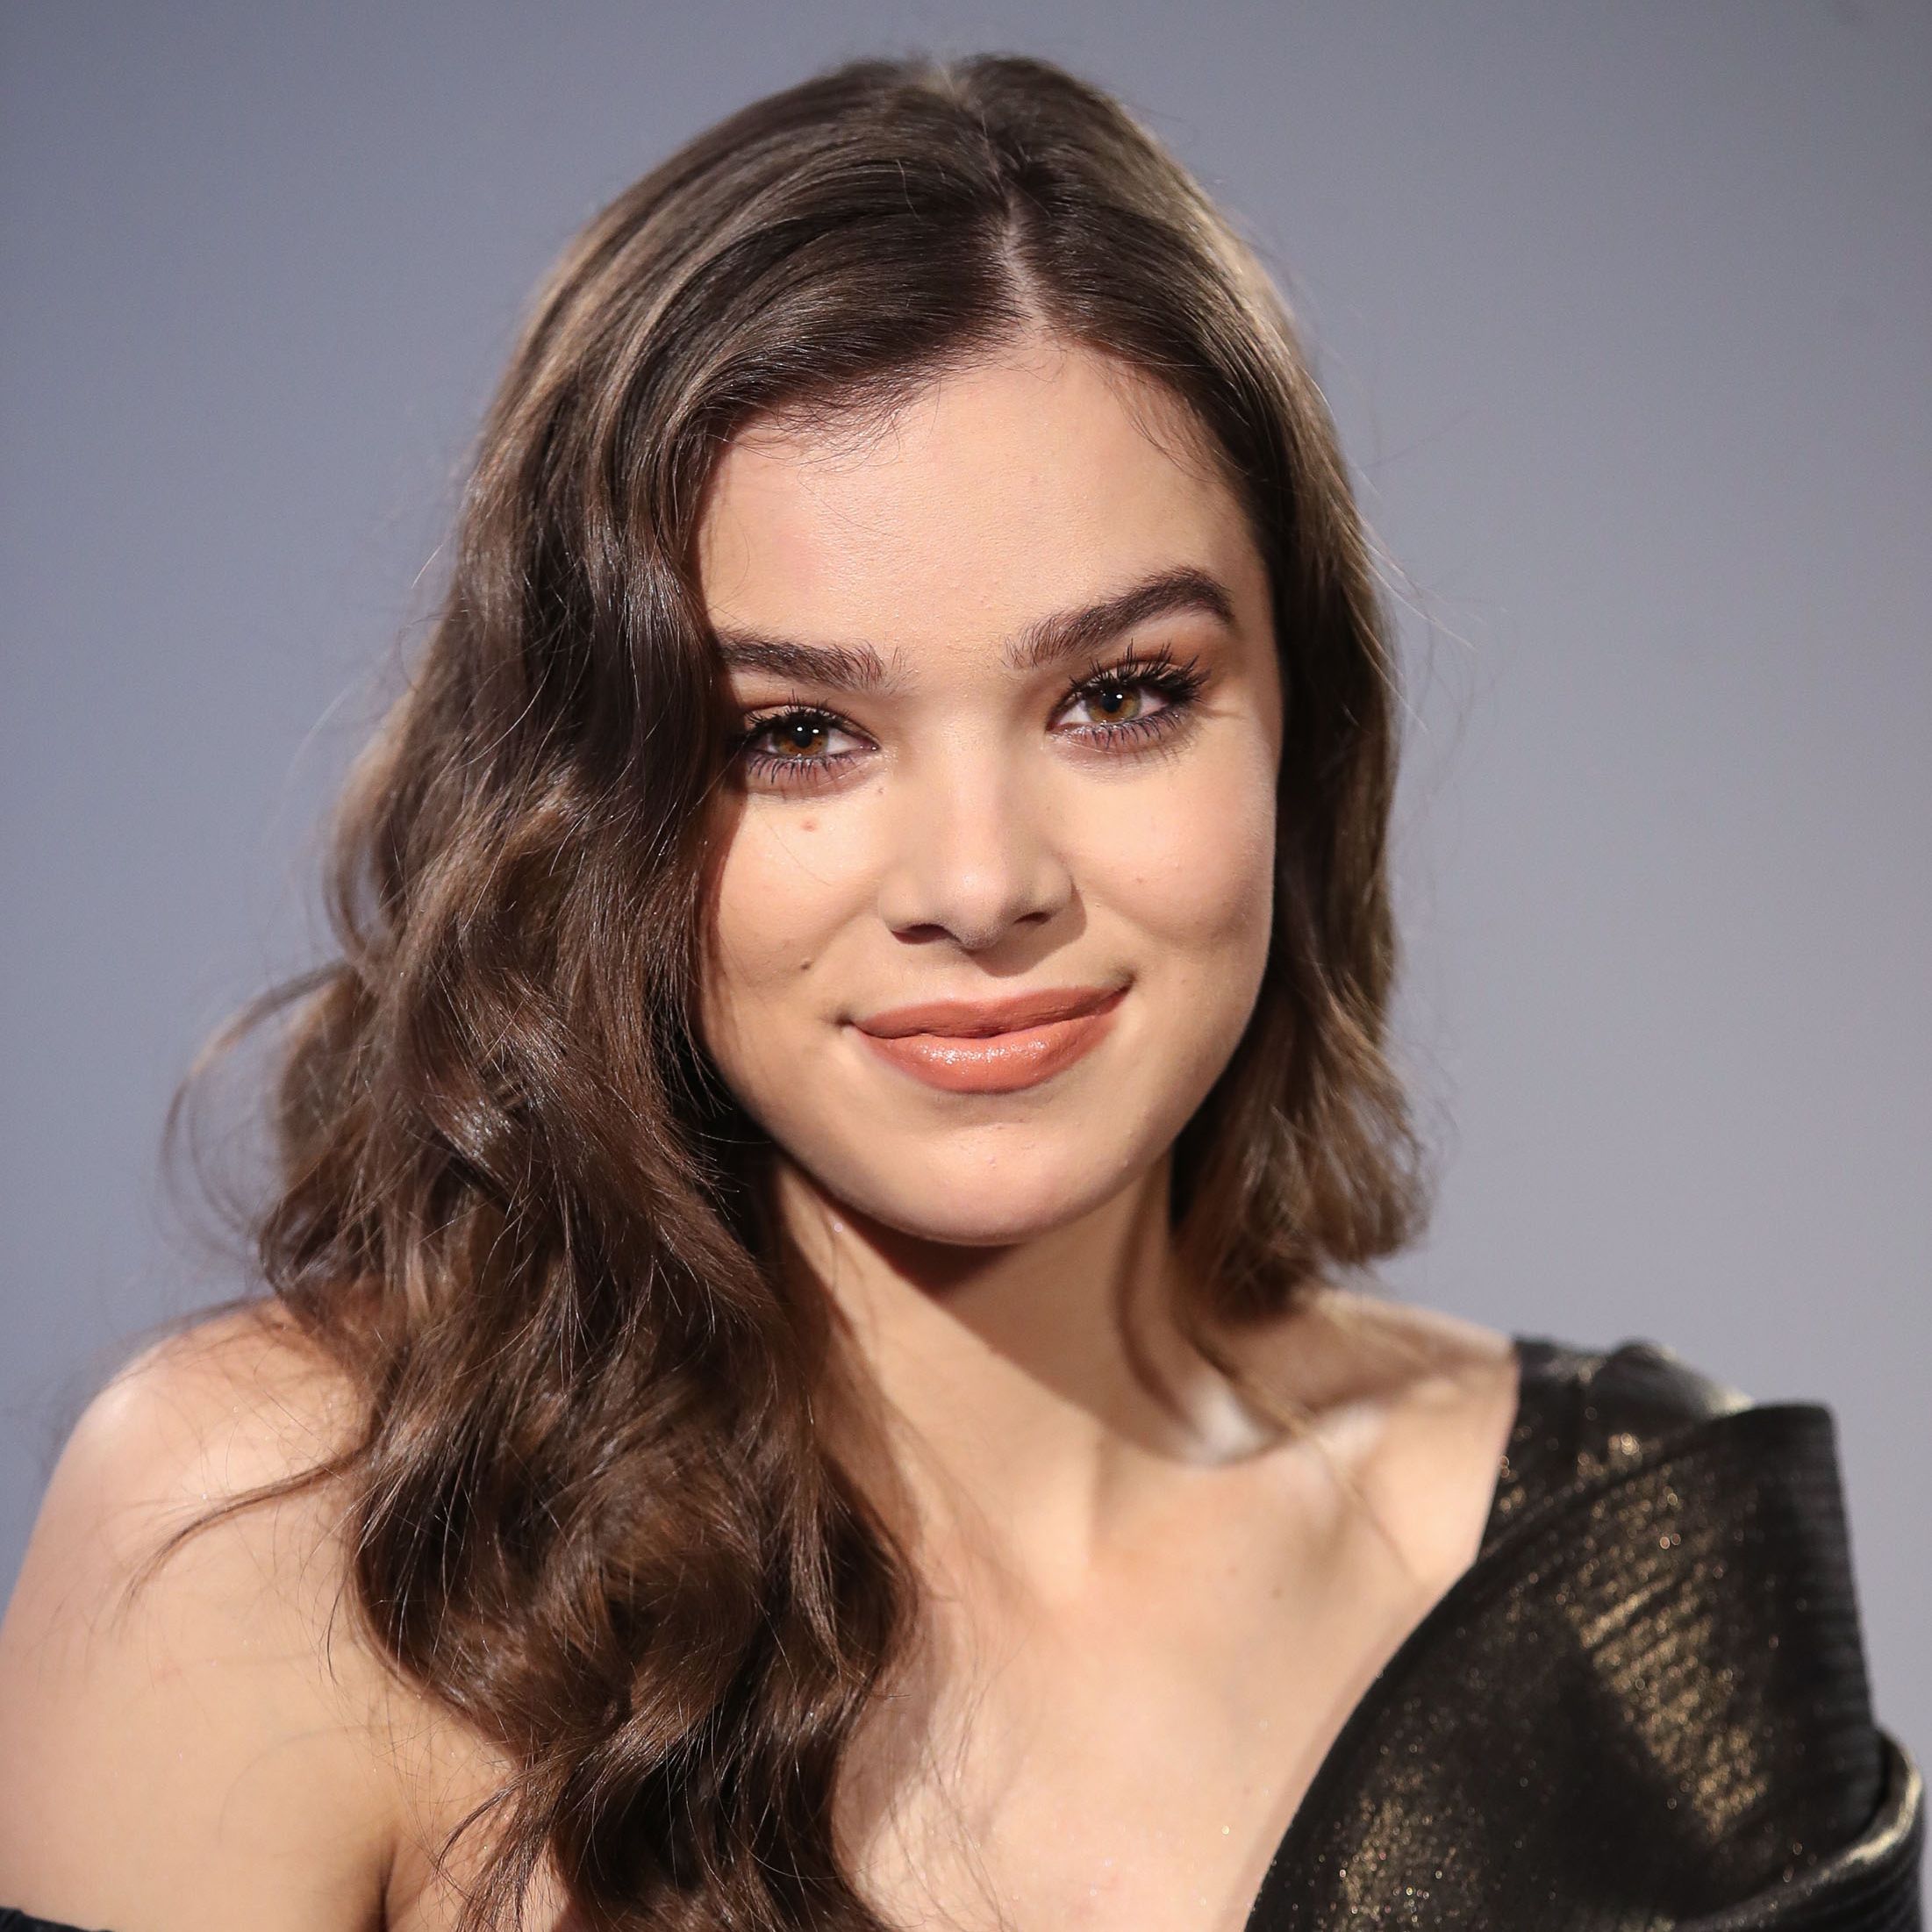 Is Hailee Steinfeld Religion Christianity And Judaism?